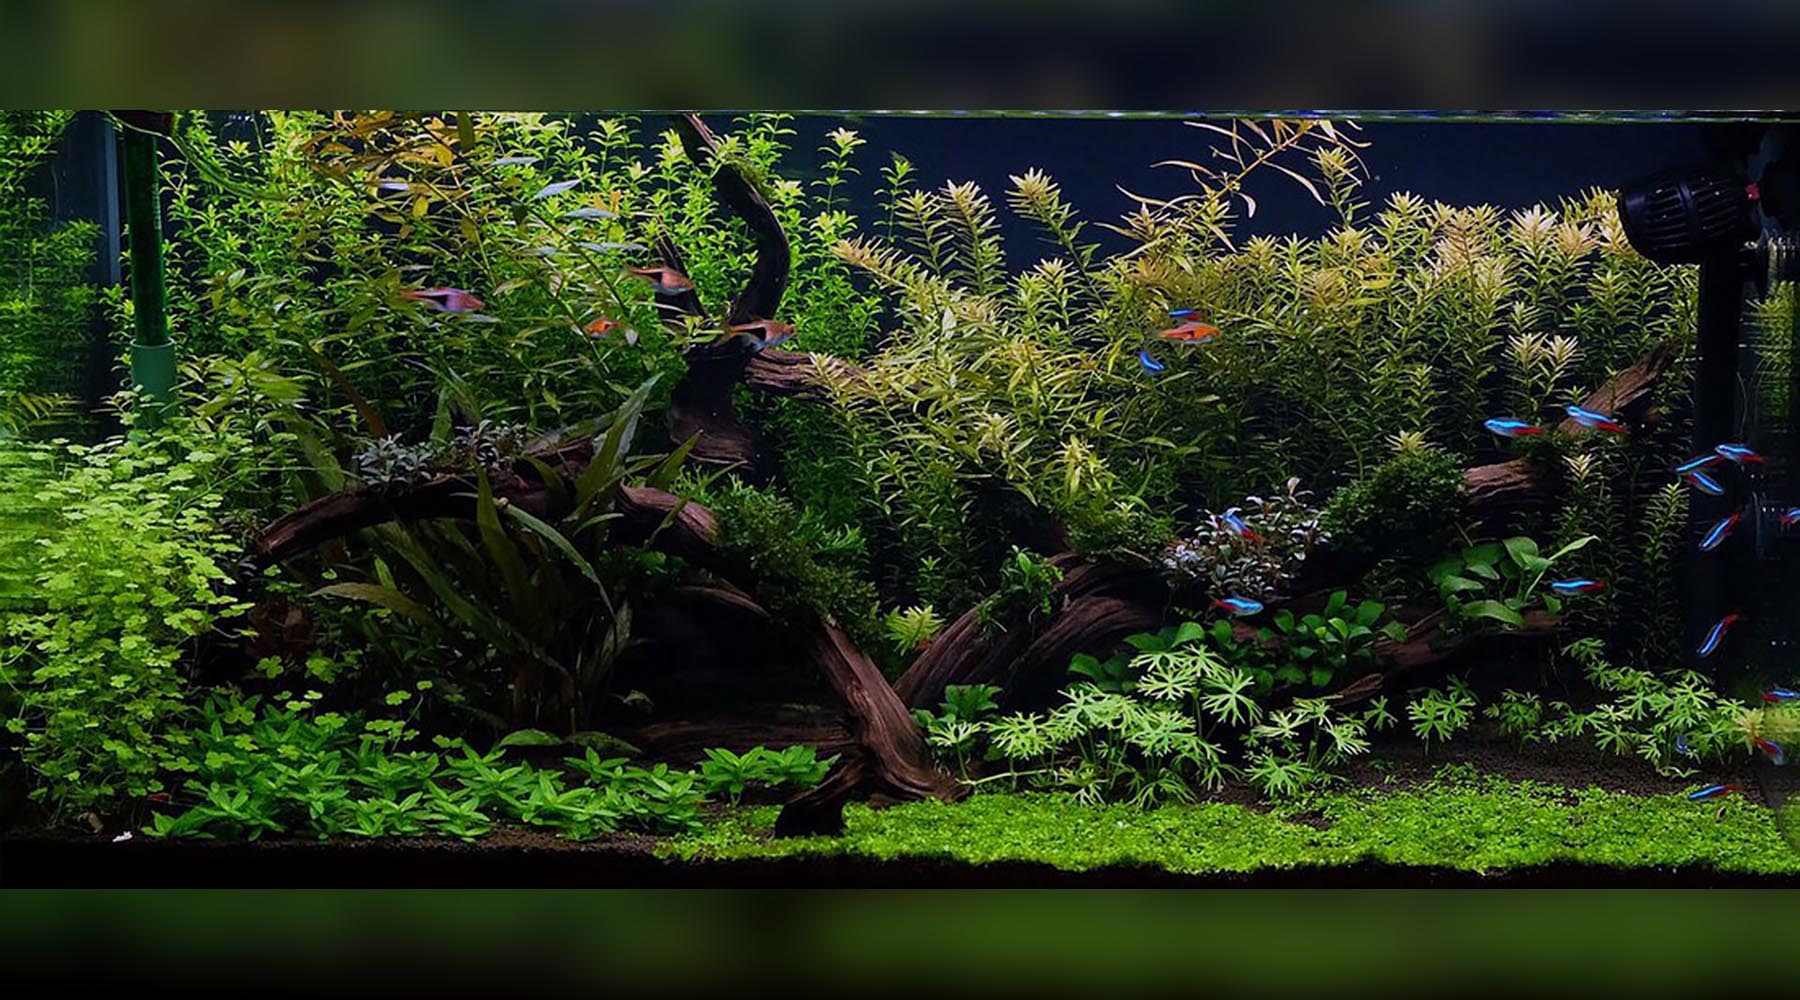 WHAT IS THE BEST SUBSTRATE FOR AQUARIUM PLANTS?